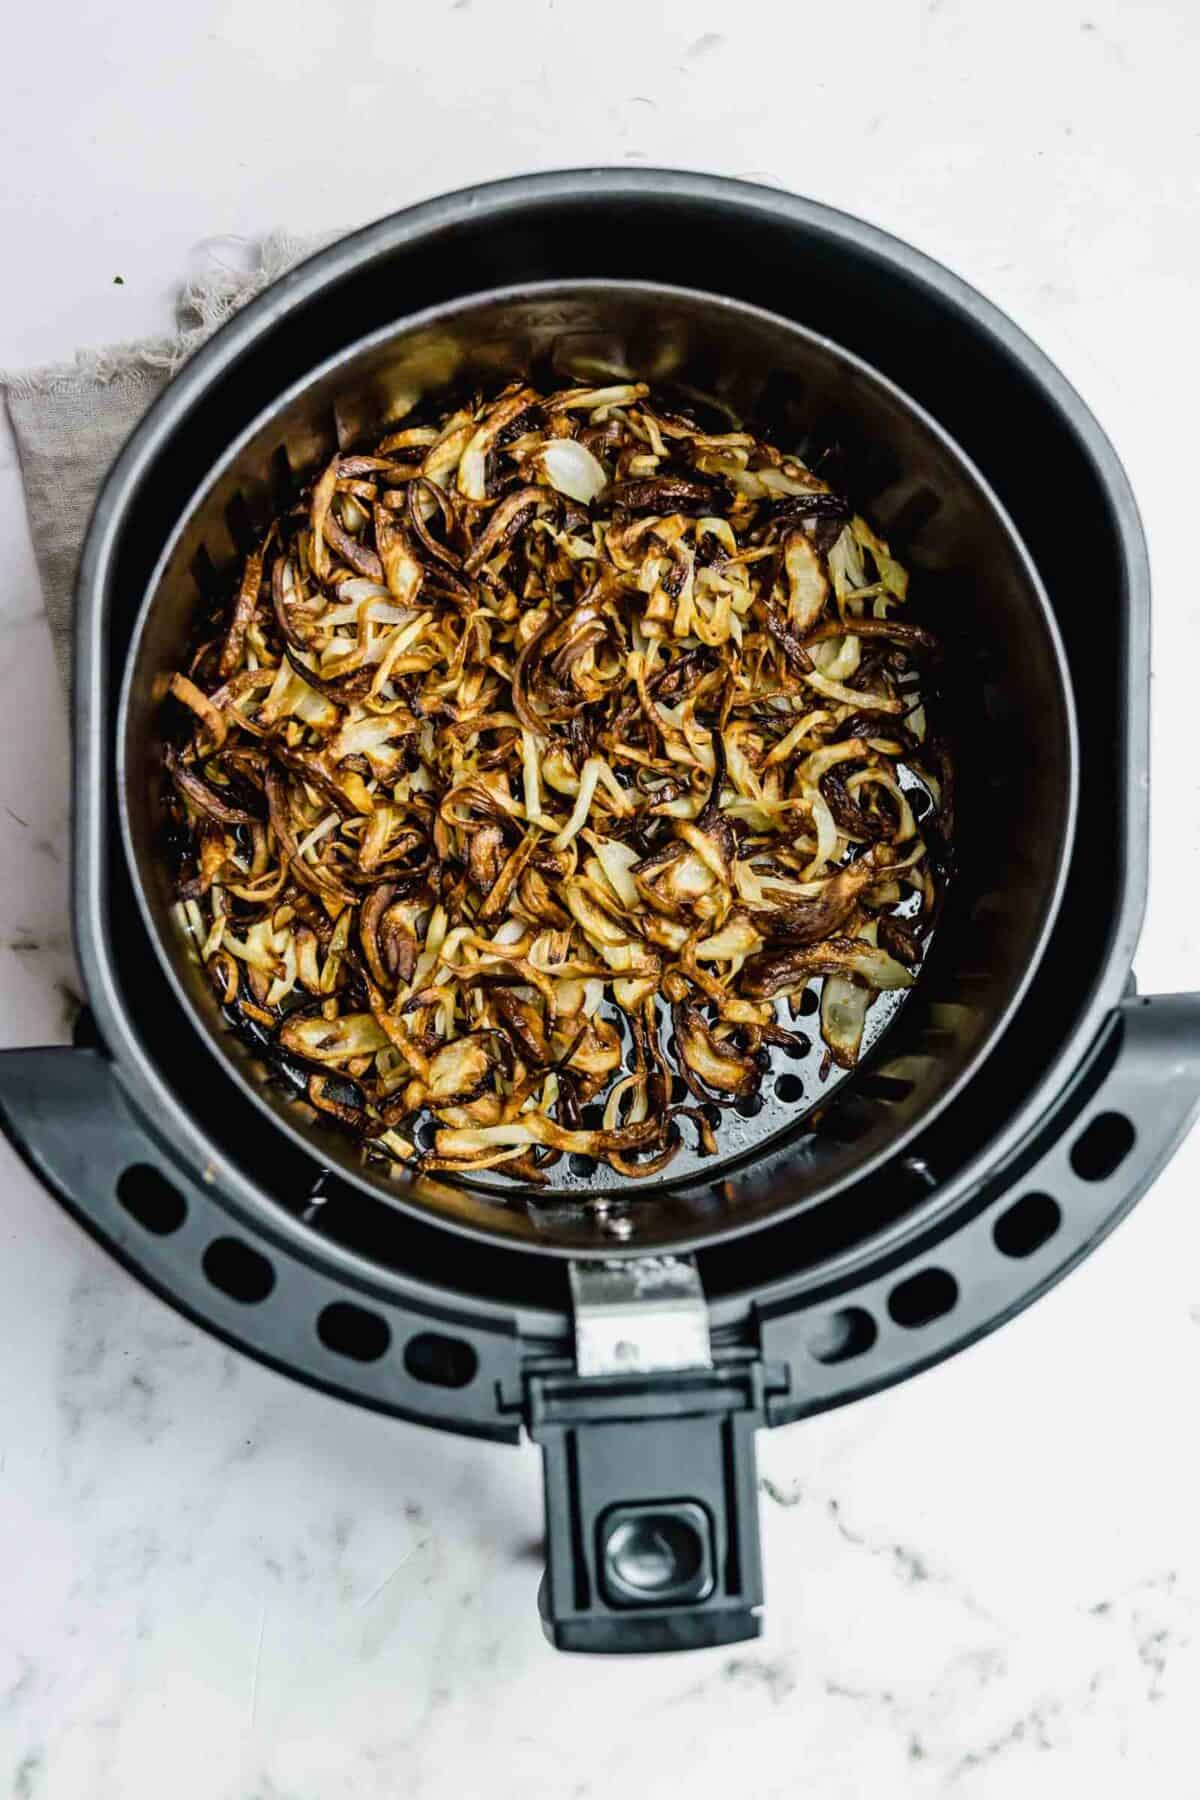 Cooked air fried onions in the basket.